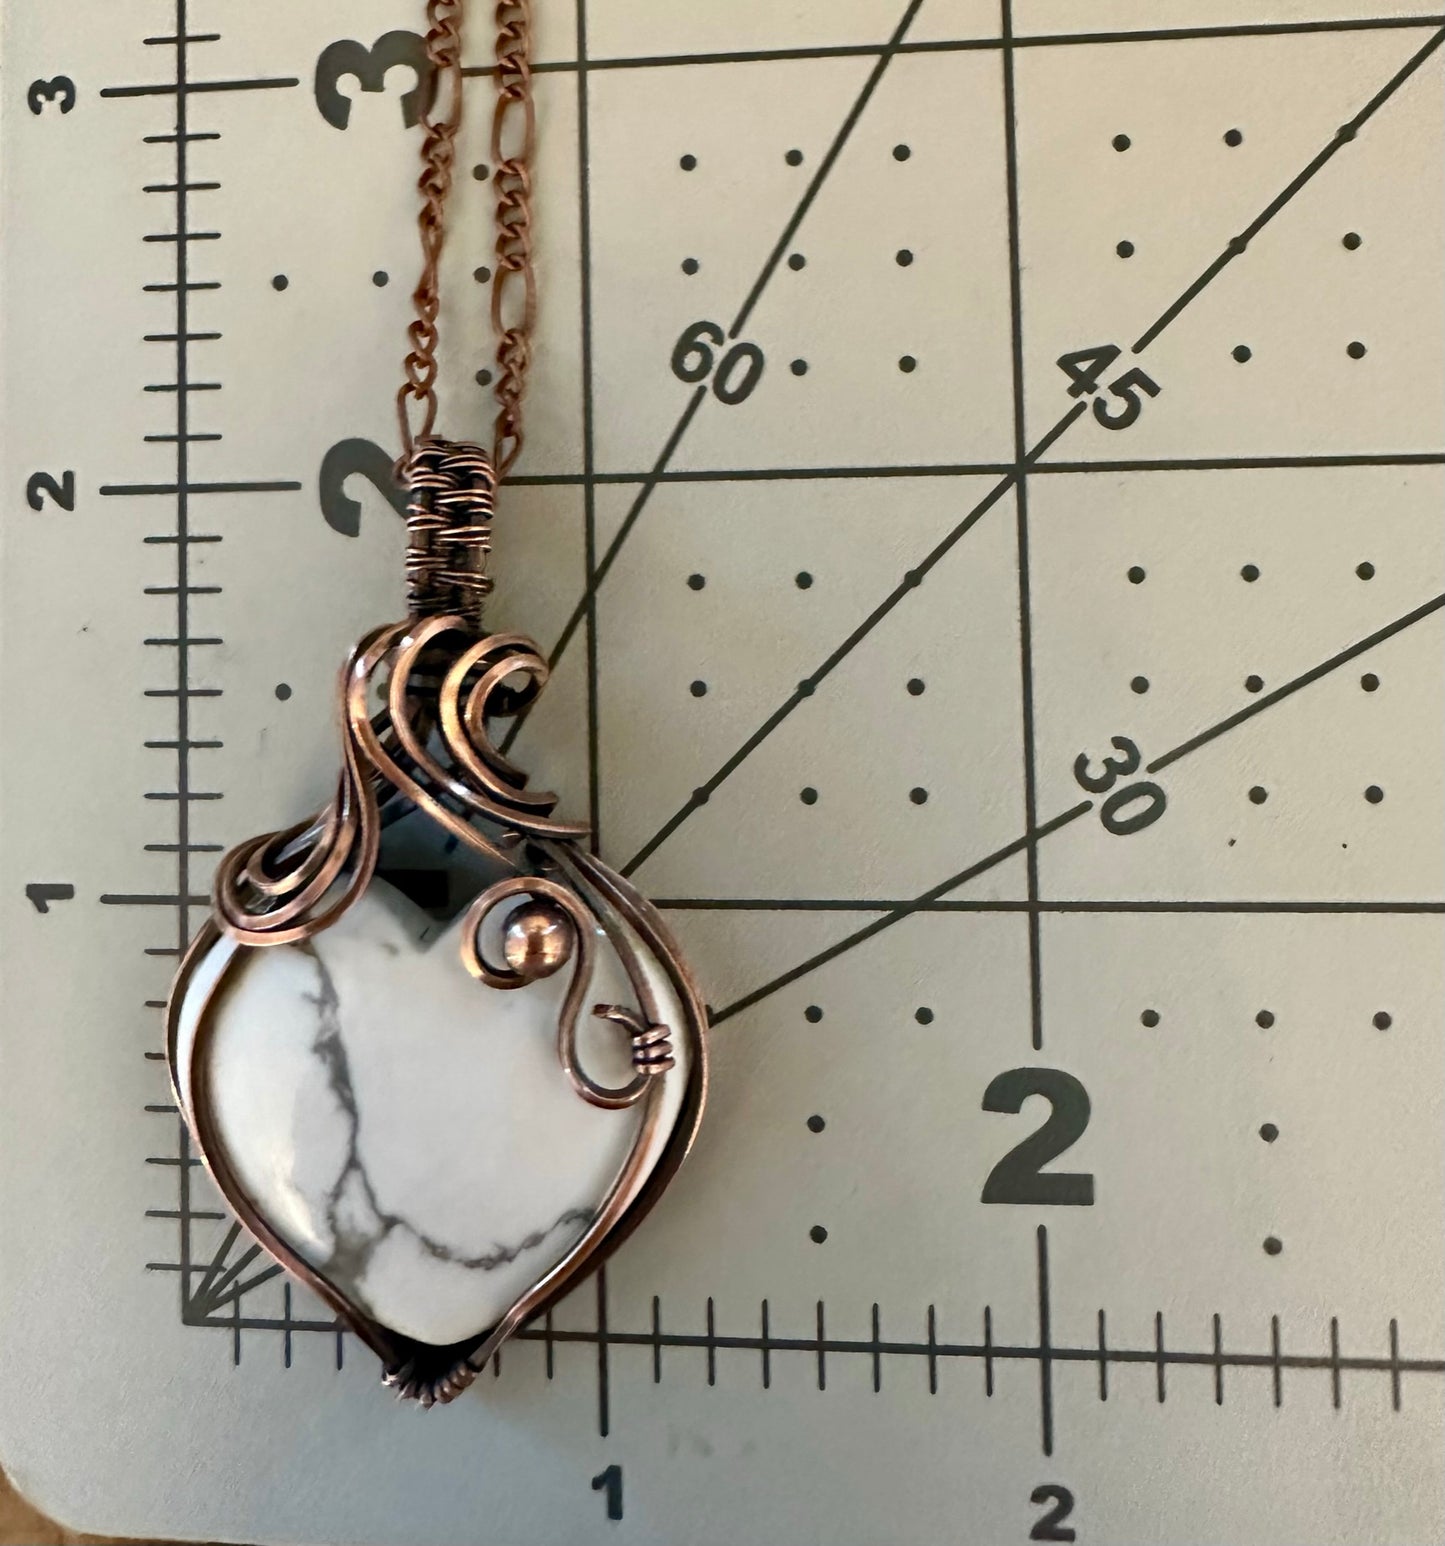 Howlite Heart Stone Wire Wrapped Pendant | Copper Wire Wrapped Pendant